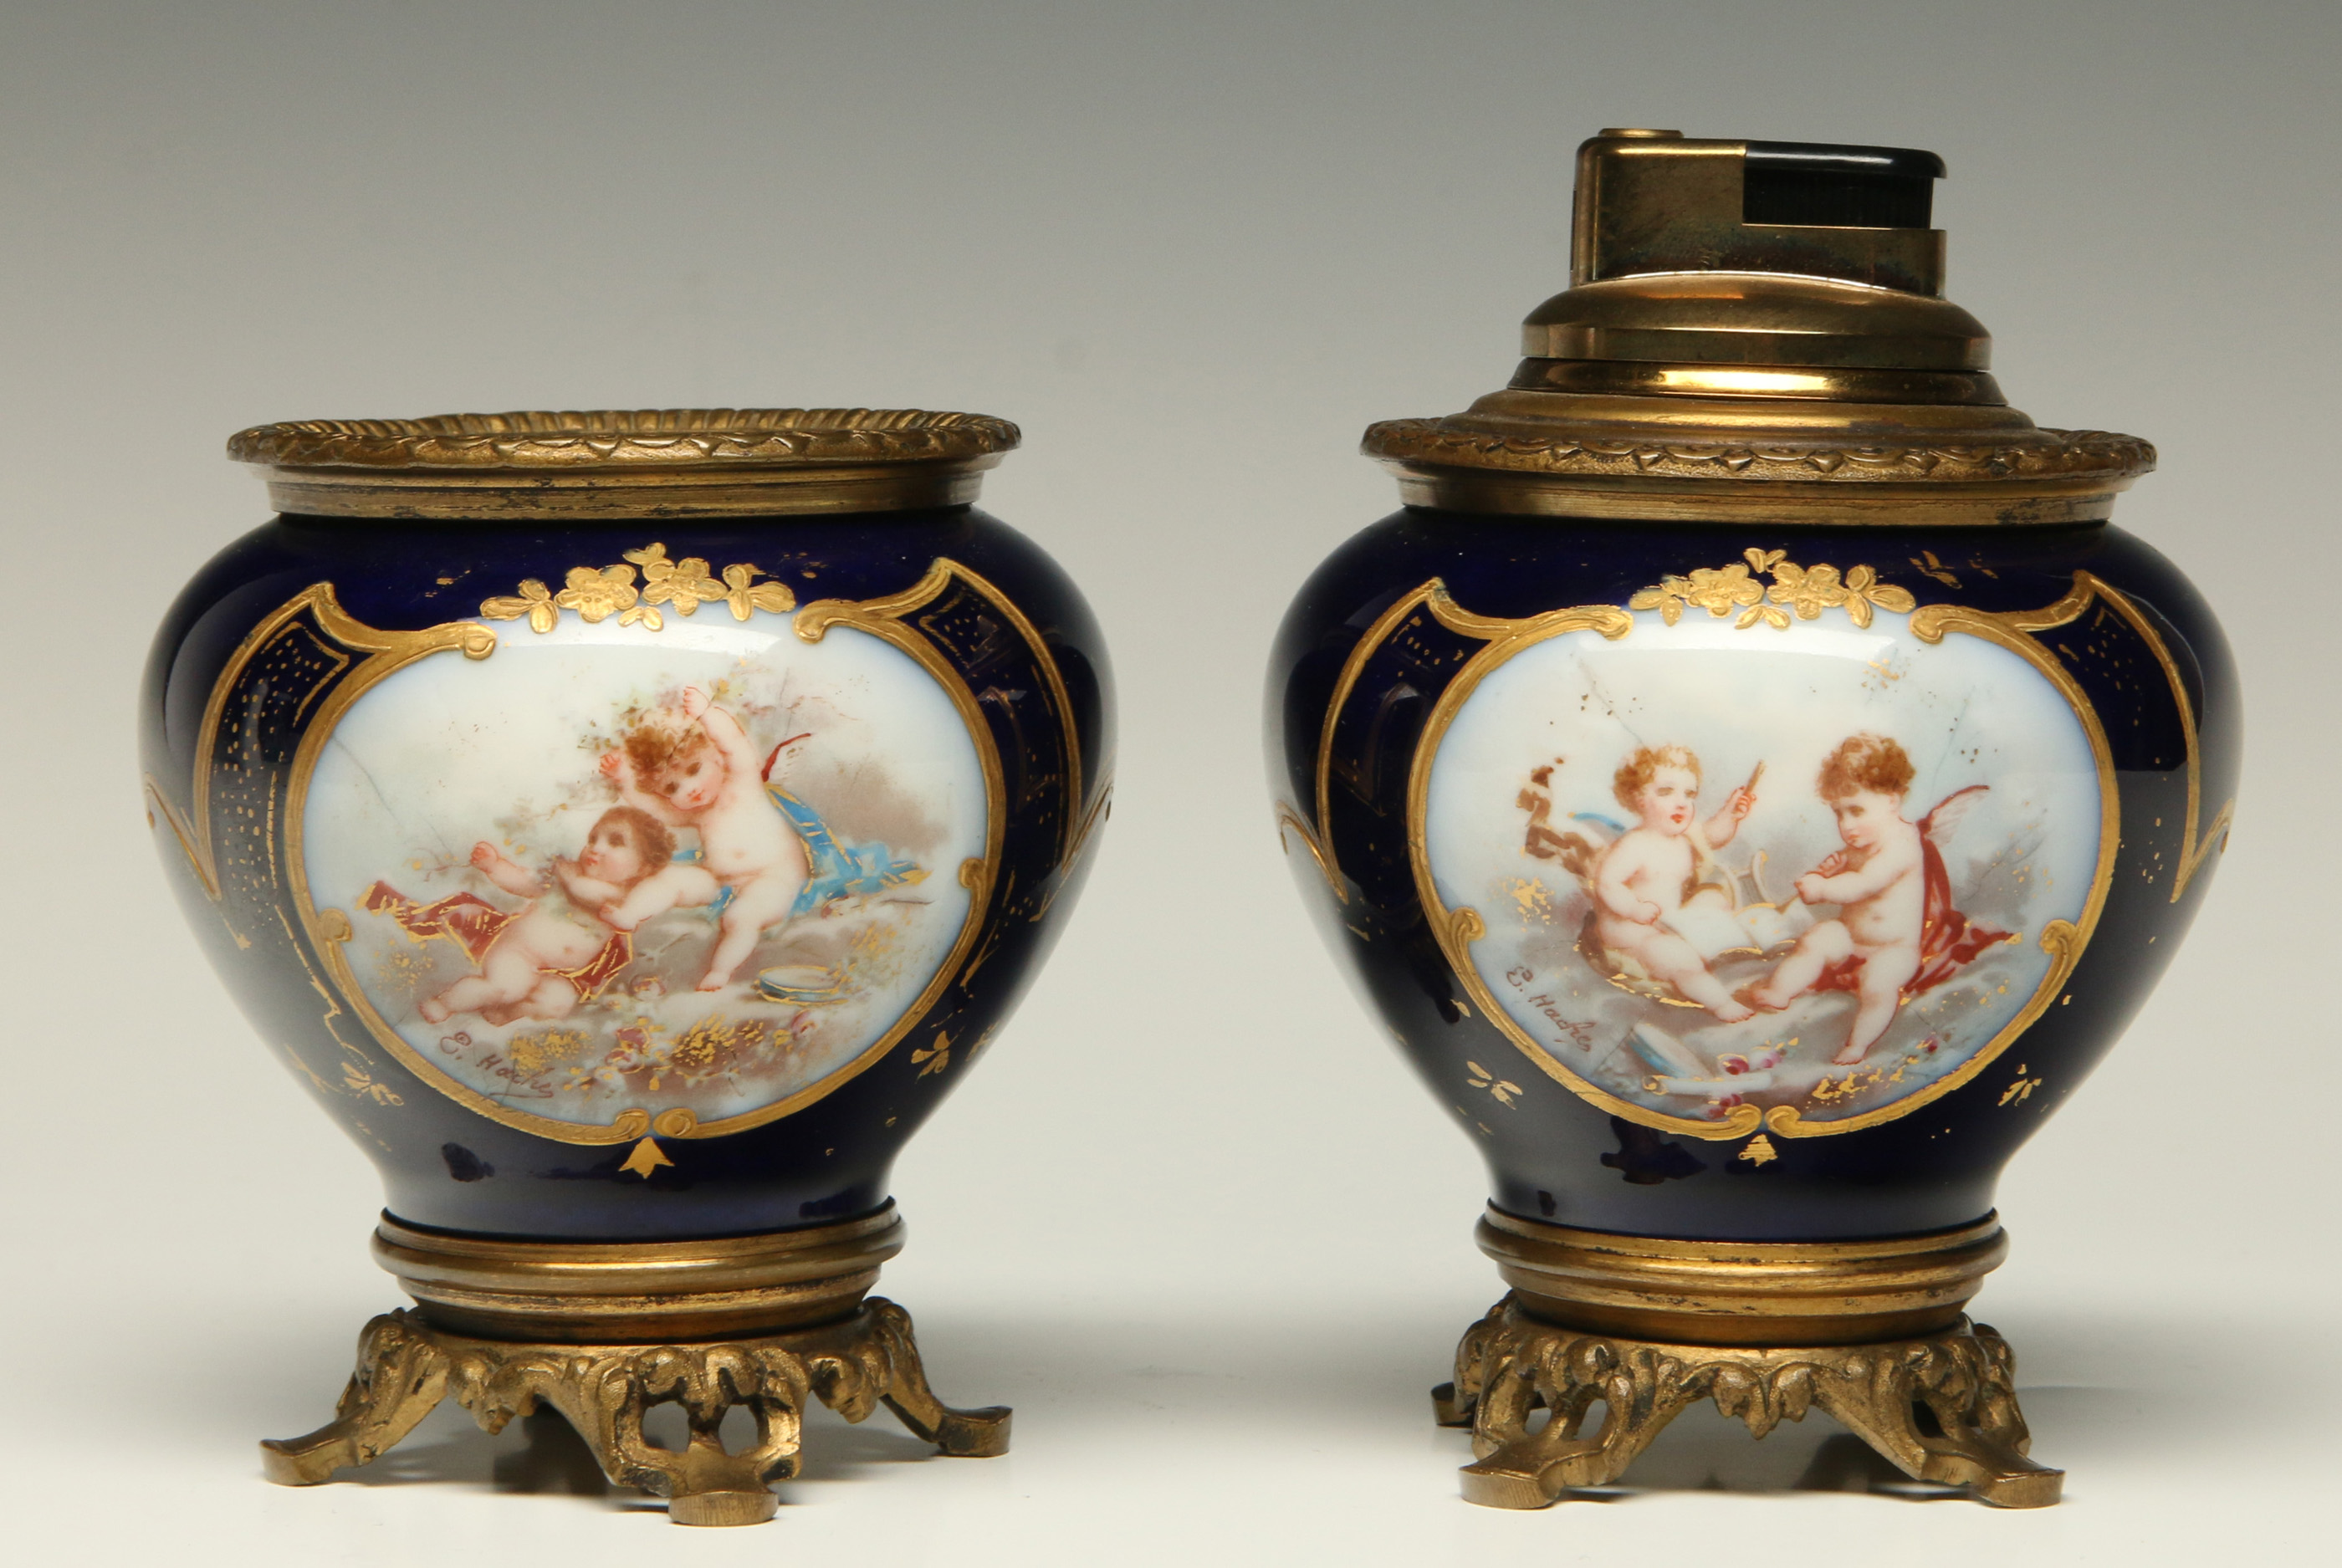 A PAIR OF SEVRES STYLE PORCELAIN TABLE ARTICLES